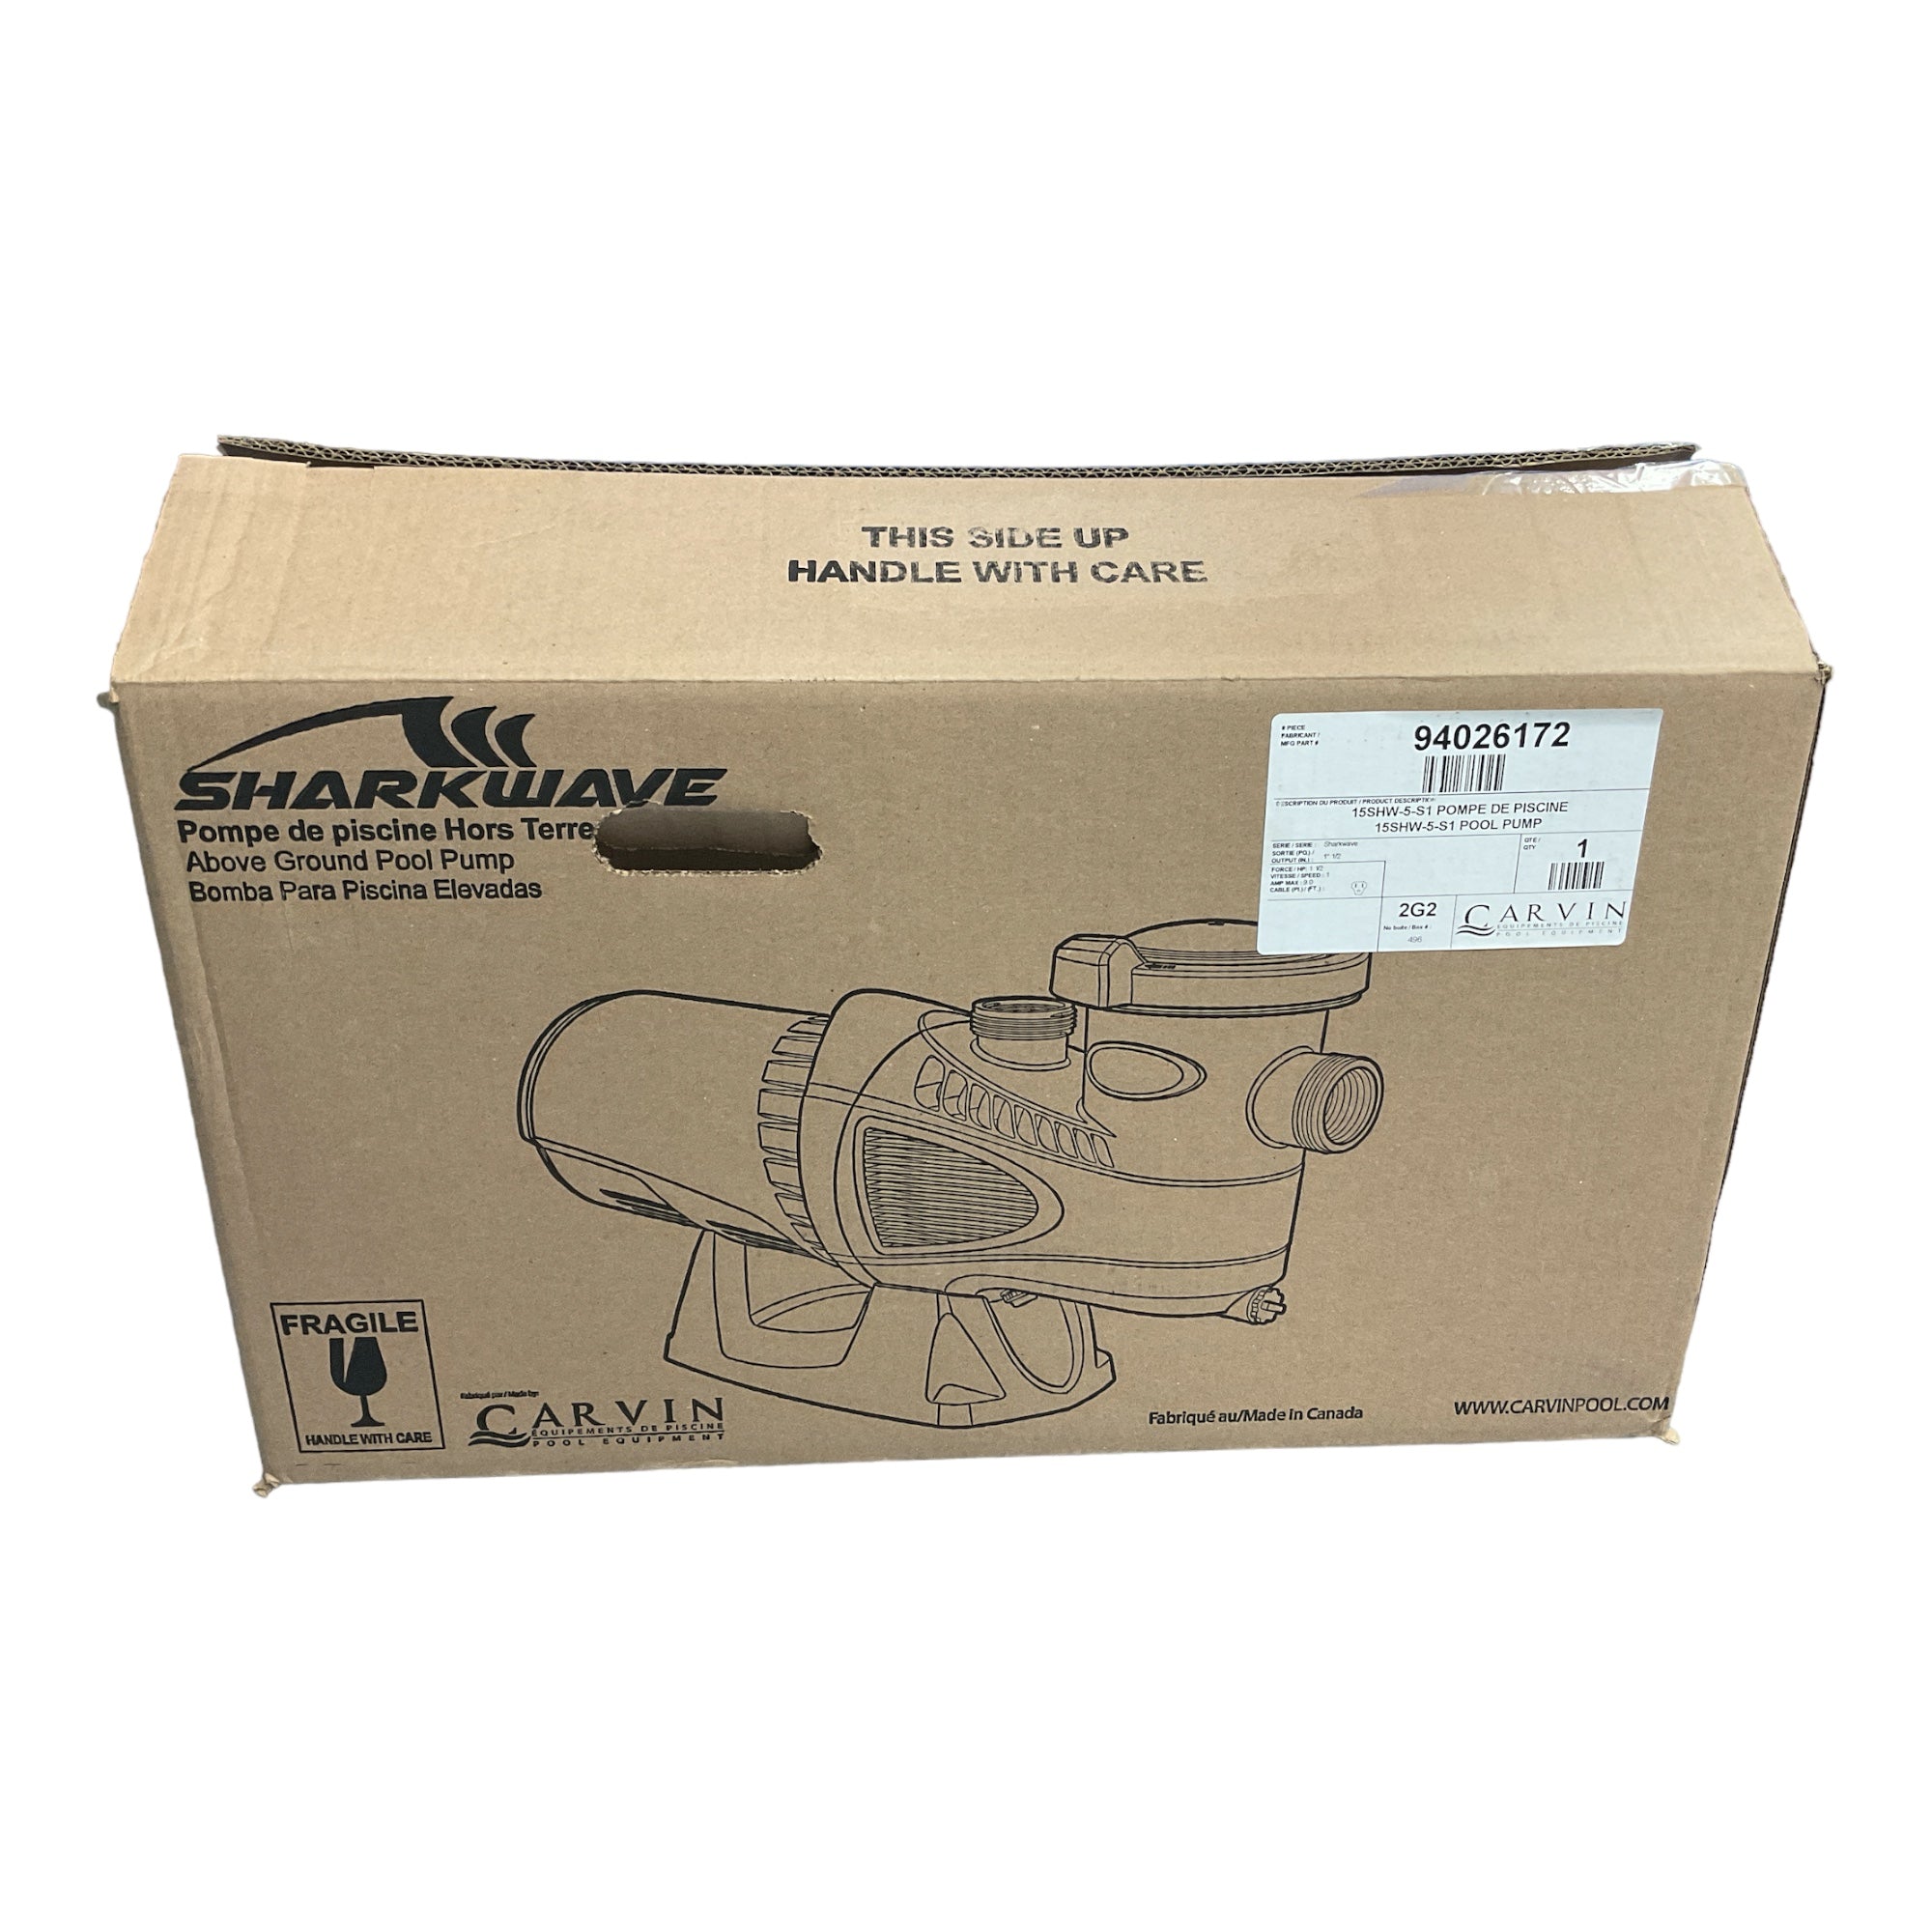 Sharkwave Above Ground Pool Pump, 1.5 HP Carvin 94026172 15SHW-5-S1 15LRC-5-S1